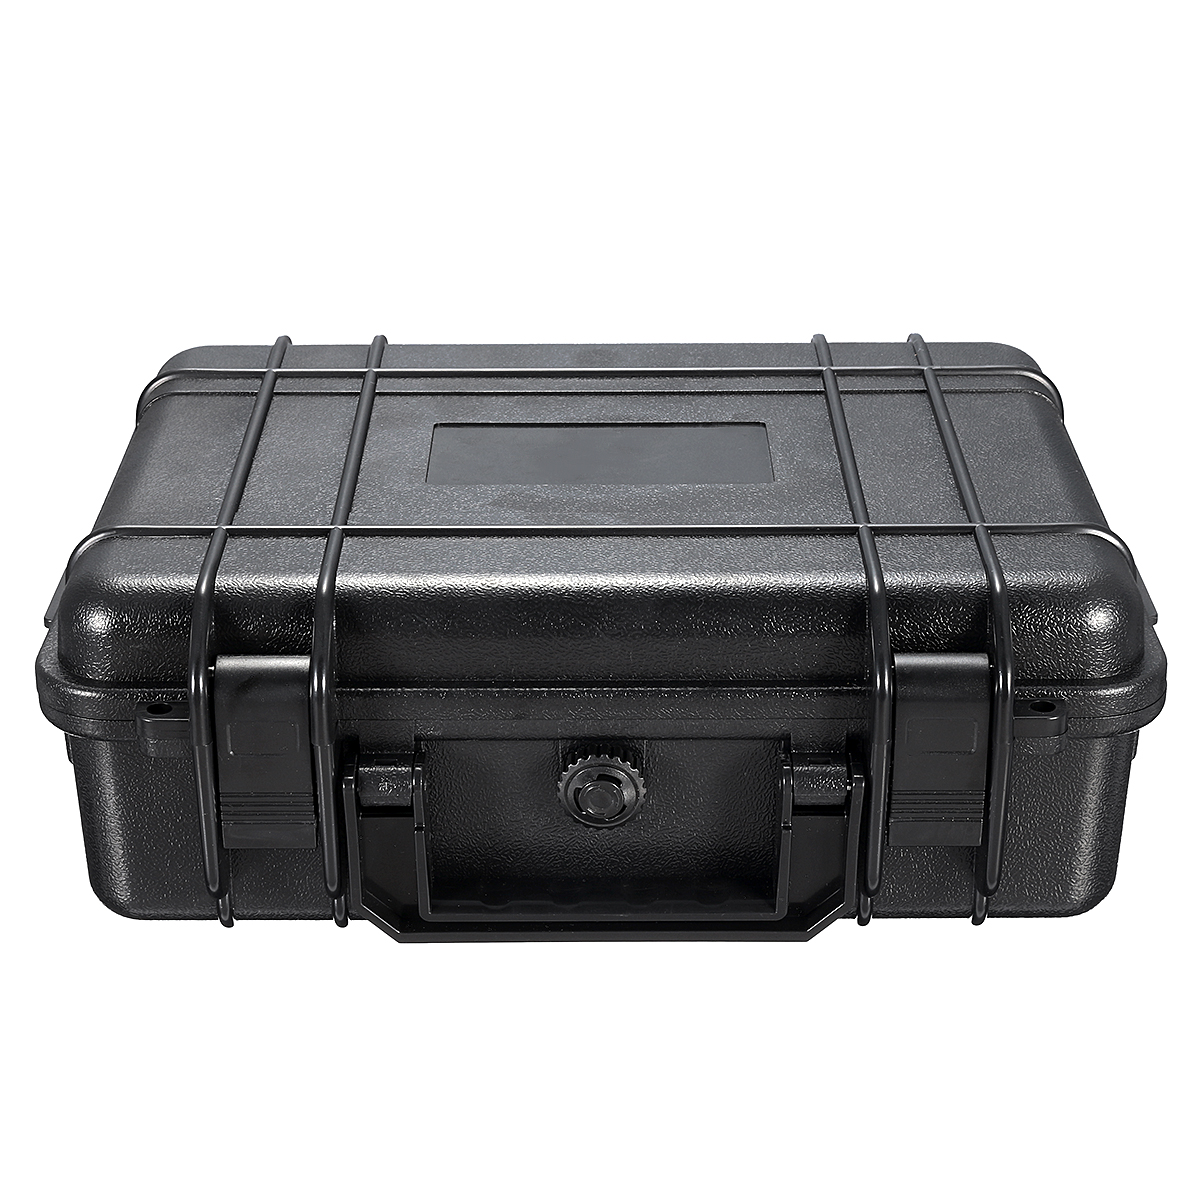 Waterproof-Hard-Carry-Tool-Case-Bag-Storage-Box-Camera-Photography-with-Sponge-18012050mm-1661734-5